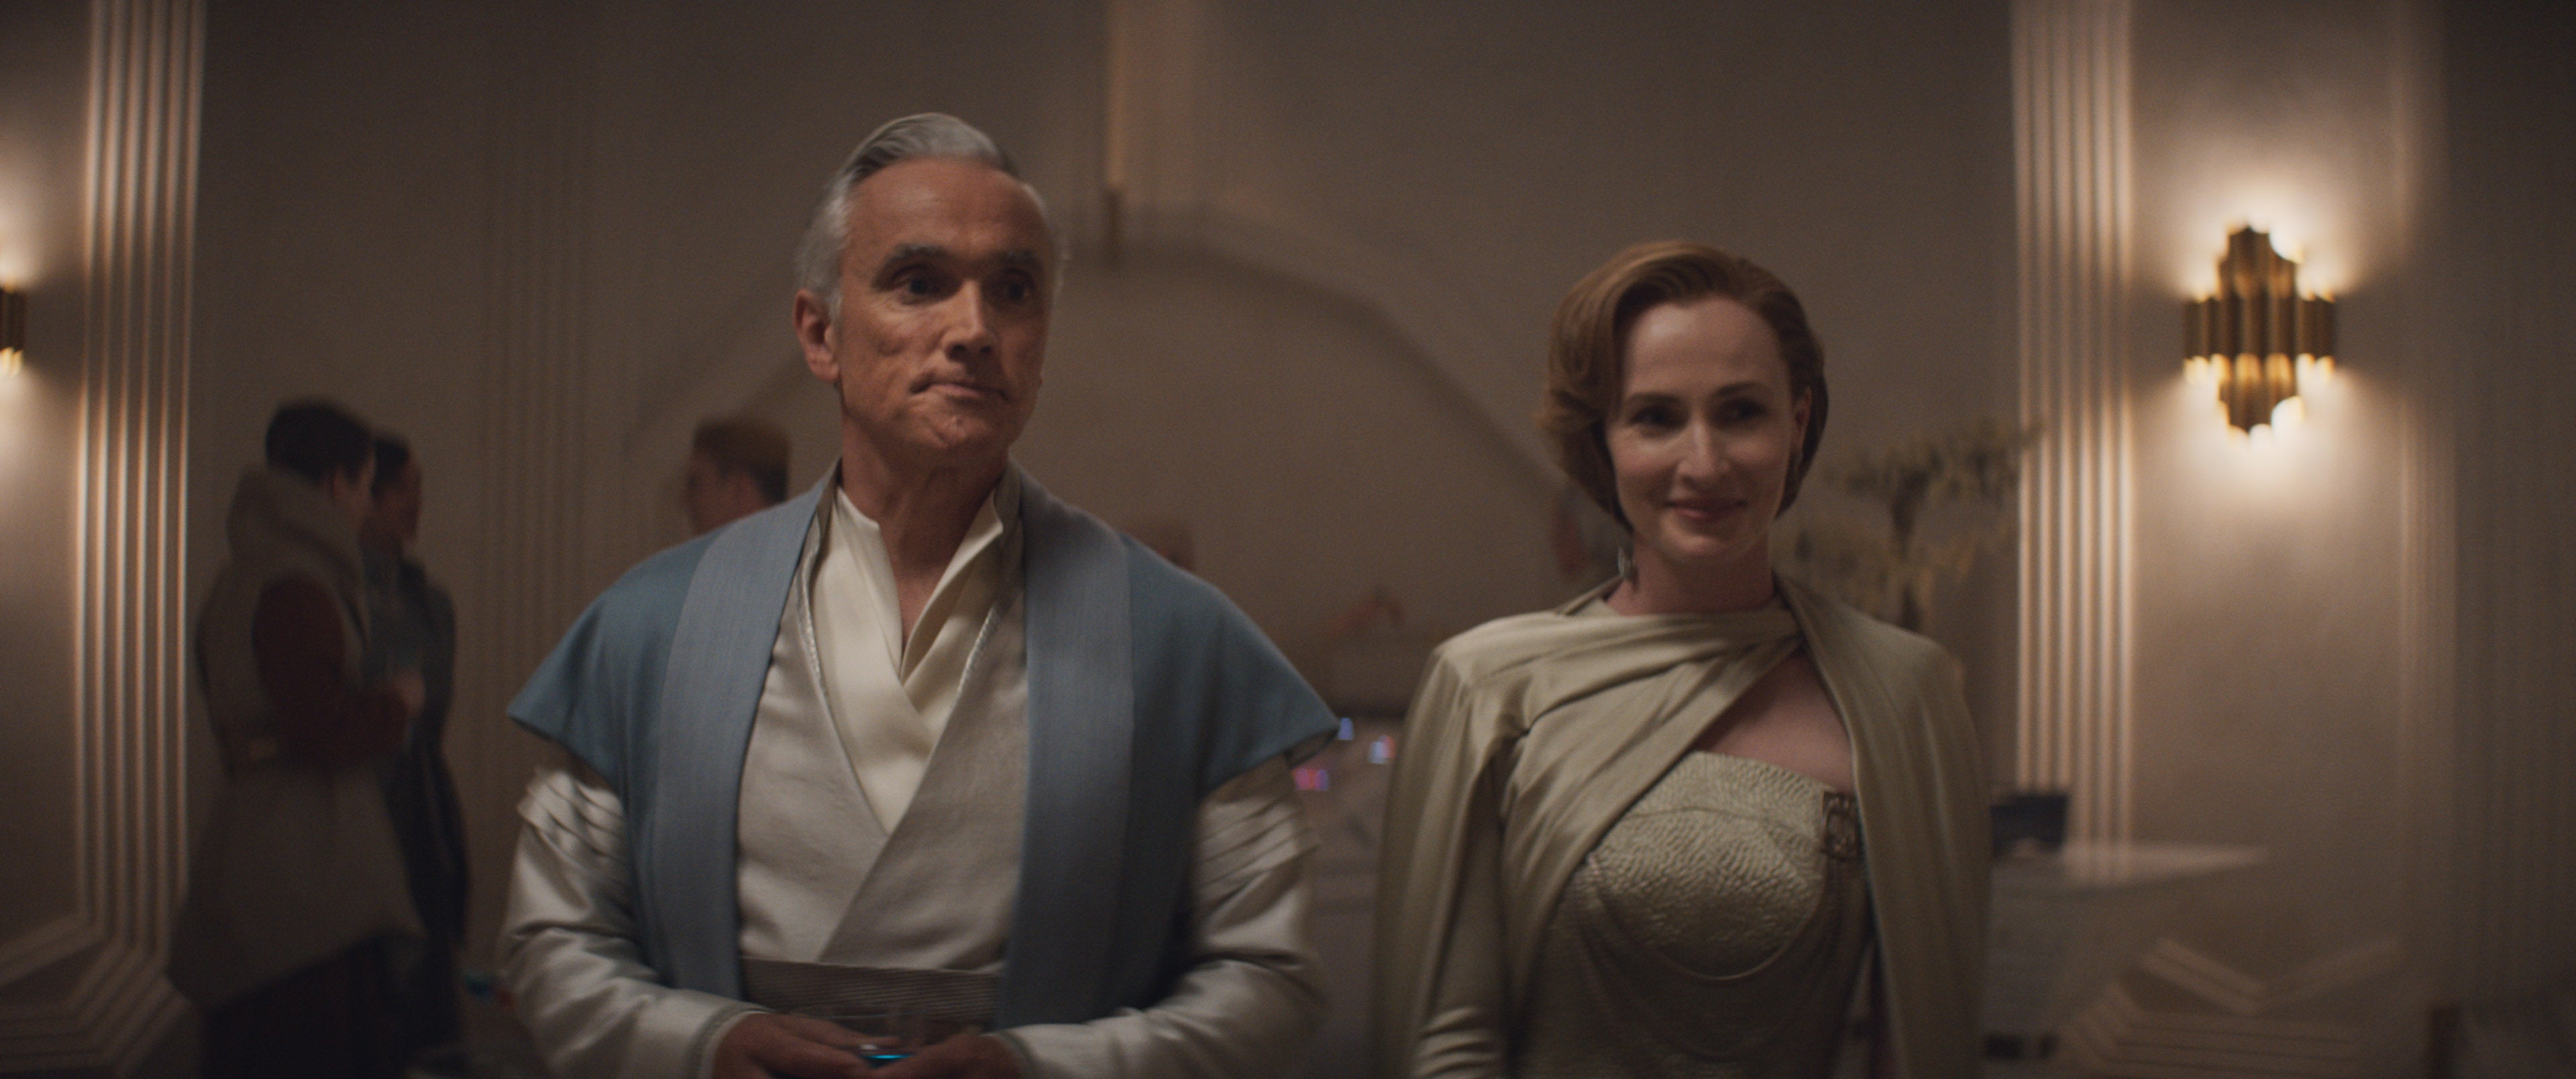 Mon Mothma smiles while walking with her husband